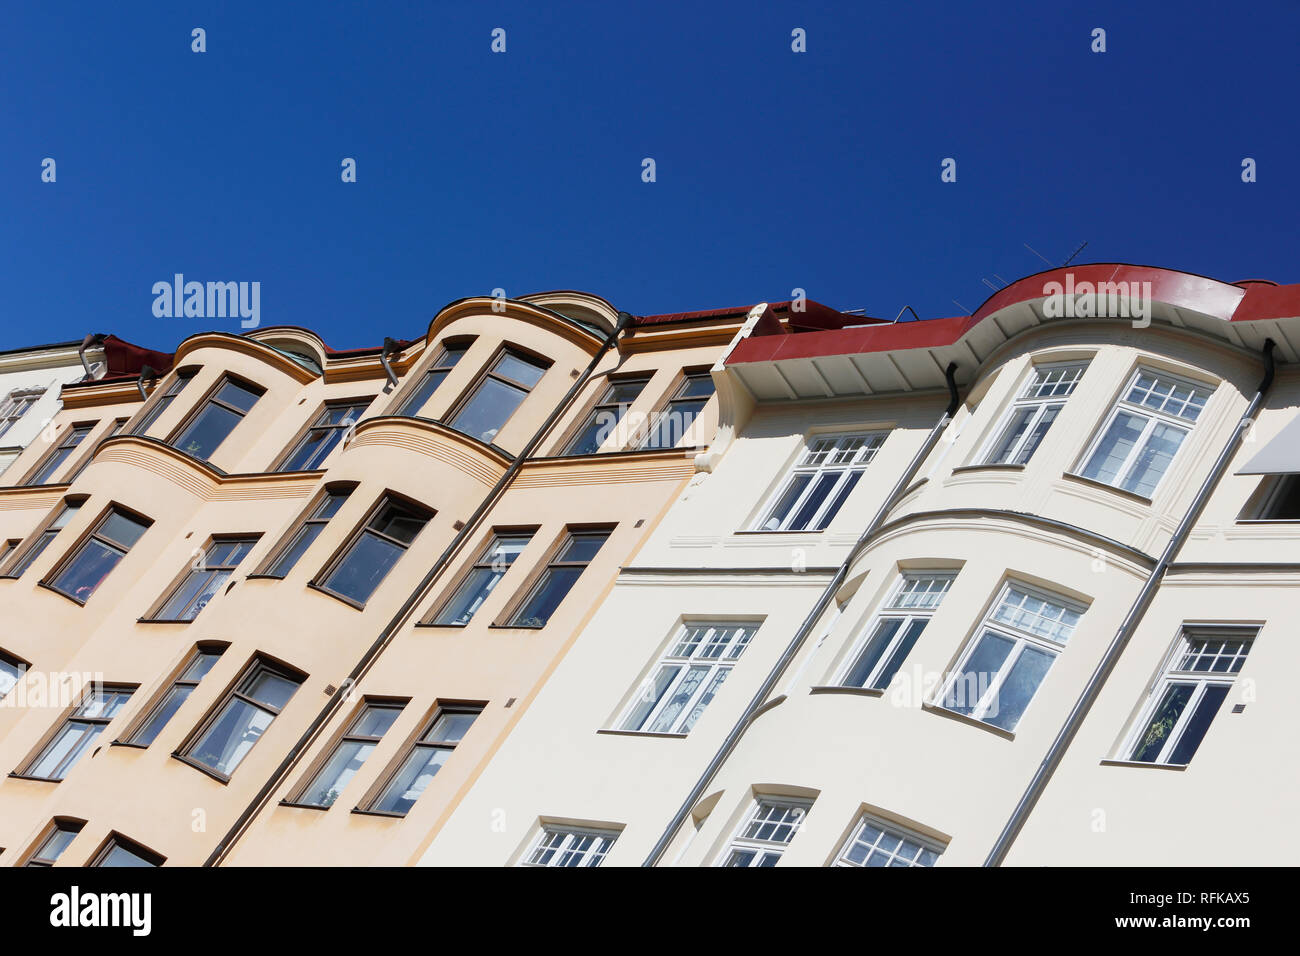 Older multi-stories residential building exteriors. Stock Photo